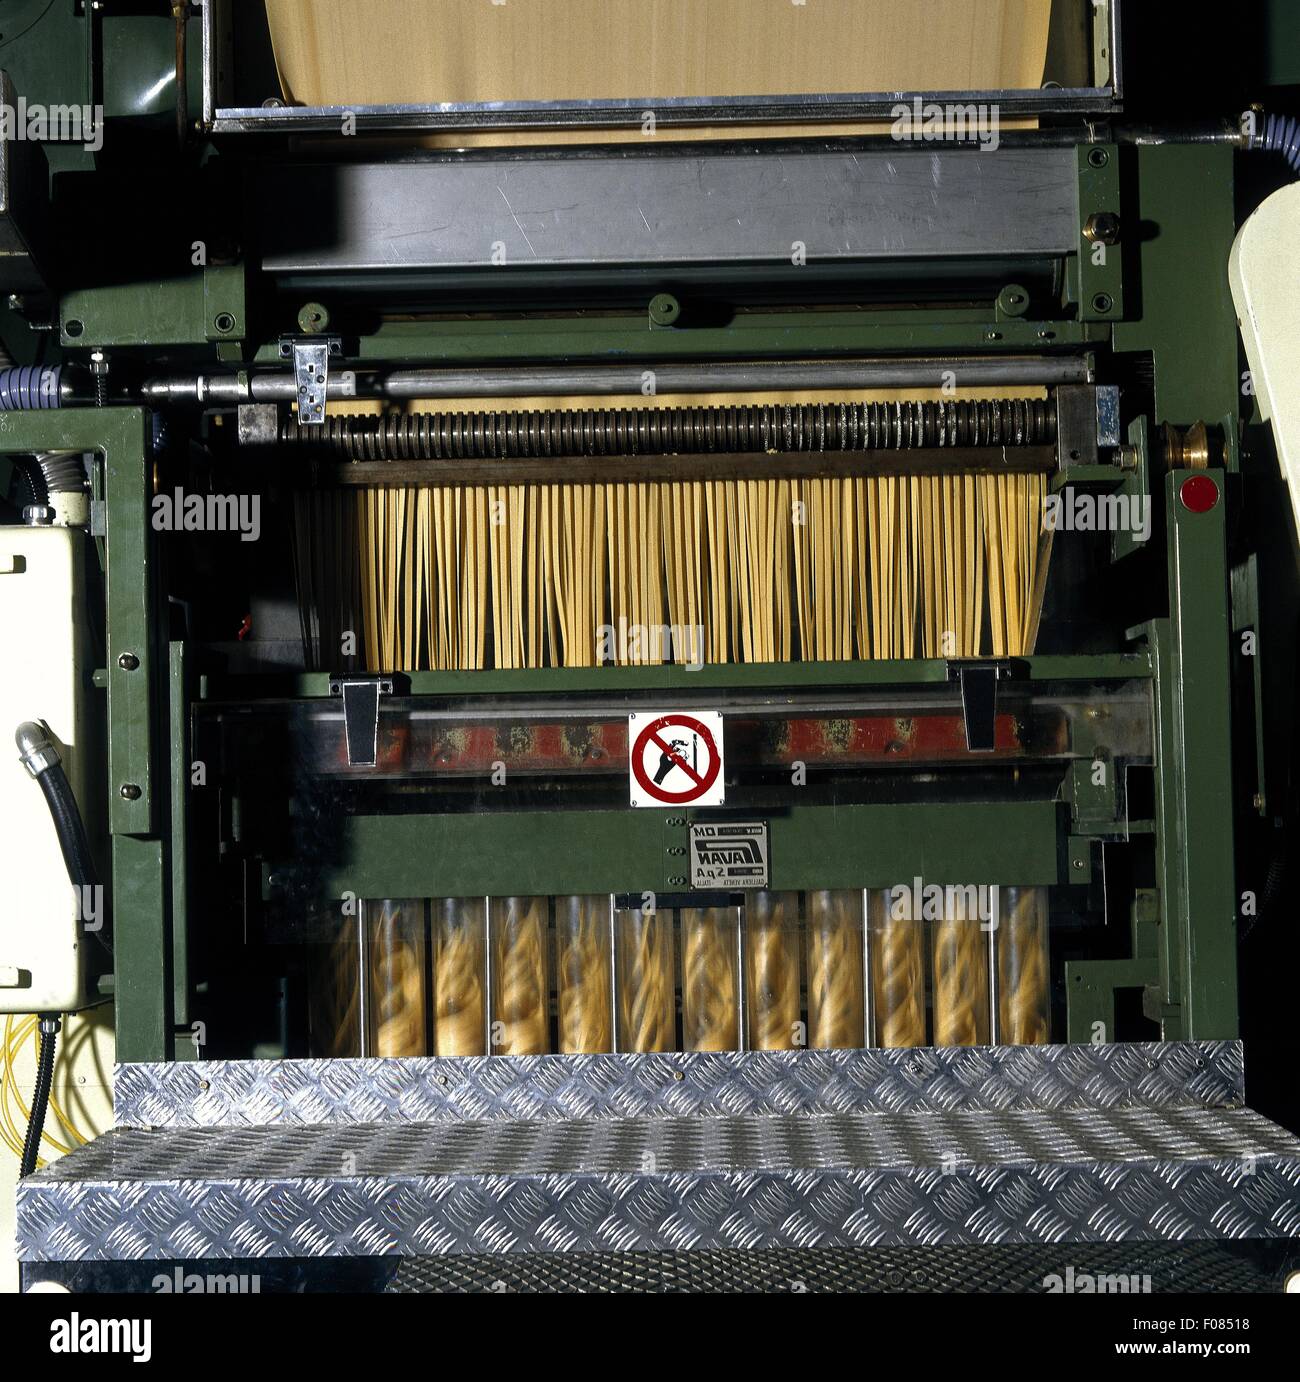 Fully automatic machine for drying spaghetti, Italy Stock Photo